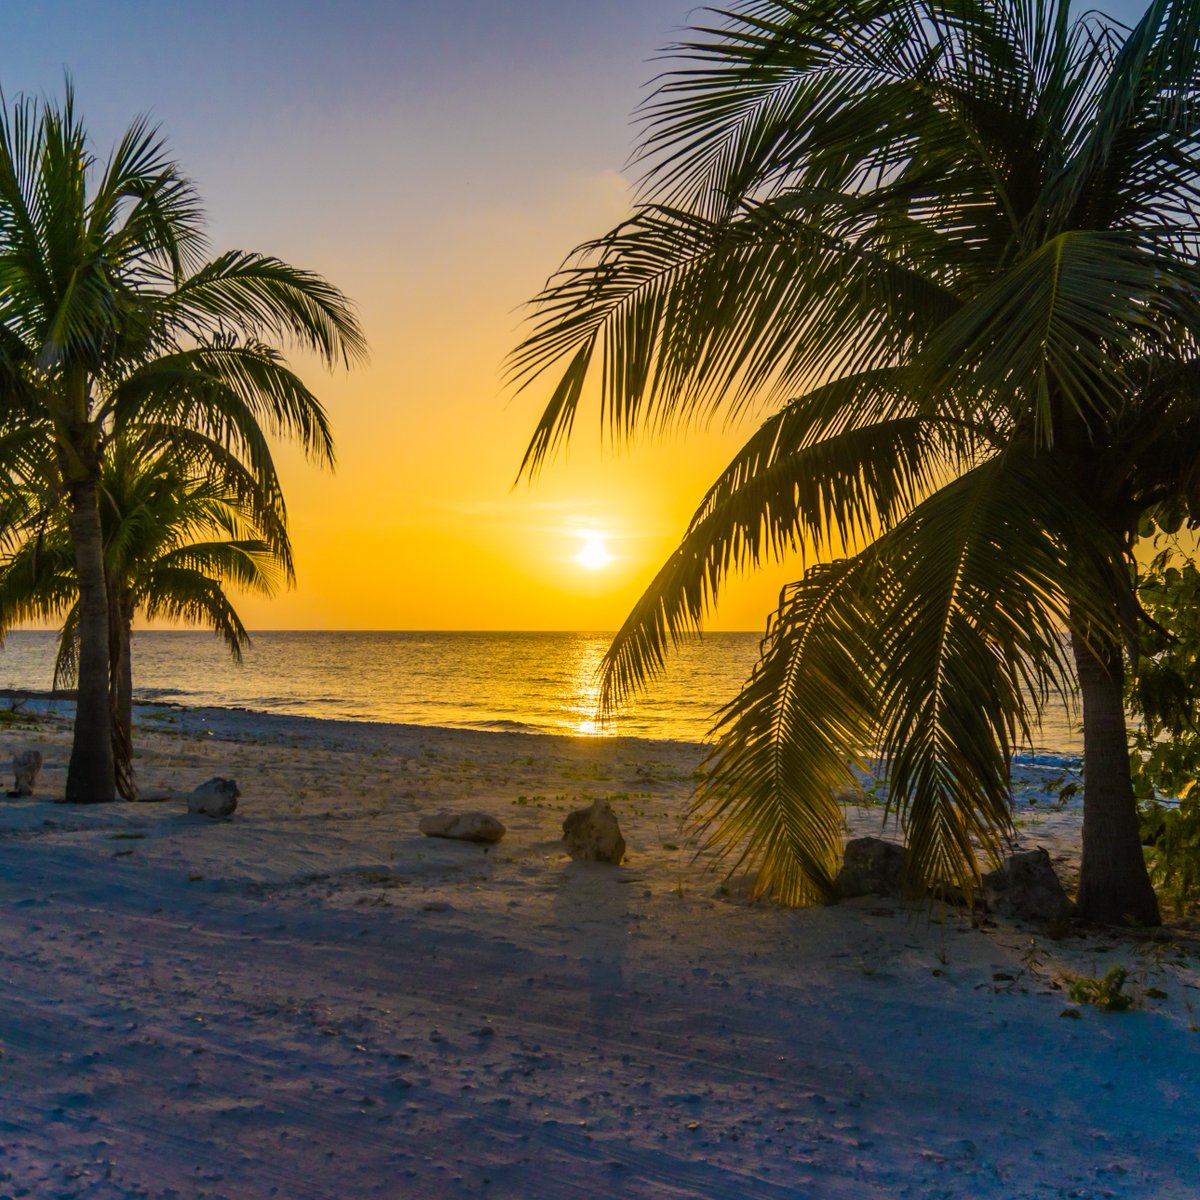 As Sunday brings a close the weekend, the Cayman sky paints its secrets in hues of gold. Join us for golden hour, where the sun meets the sea, and mysteries unfold. #visitcaymanislands #goldenhour #caribbeansunset